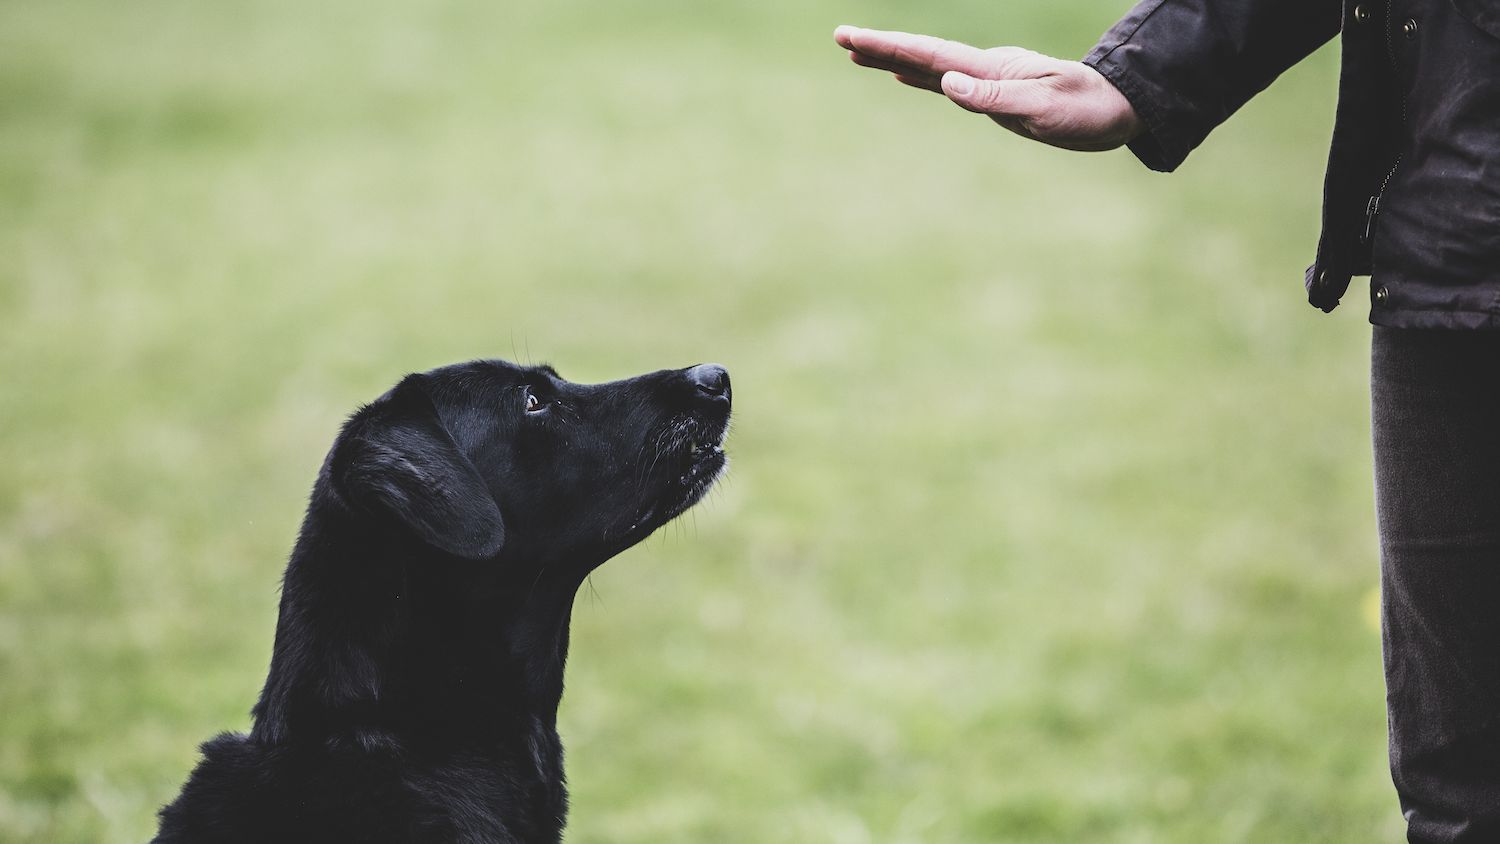 Dog Obedience: Where Did It Come From?